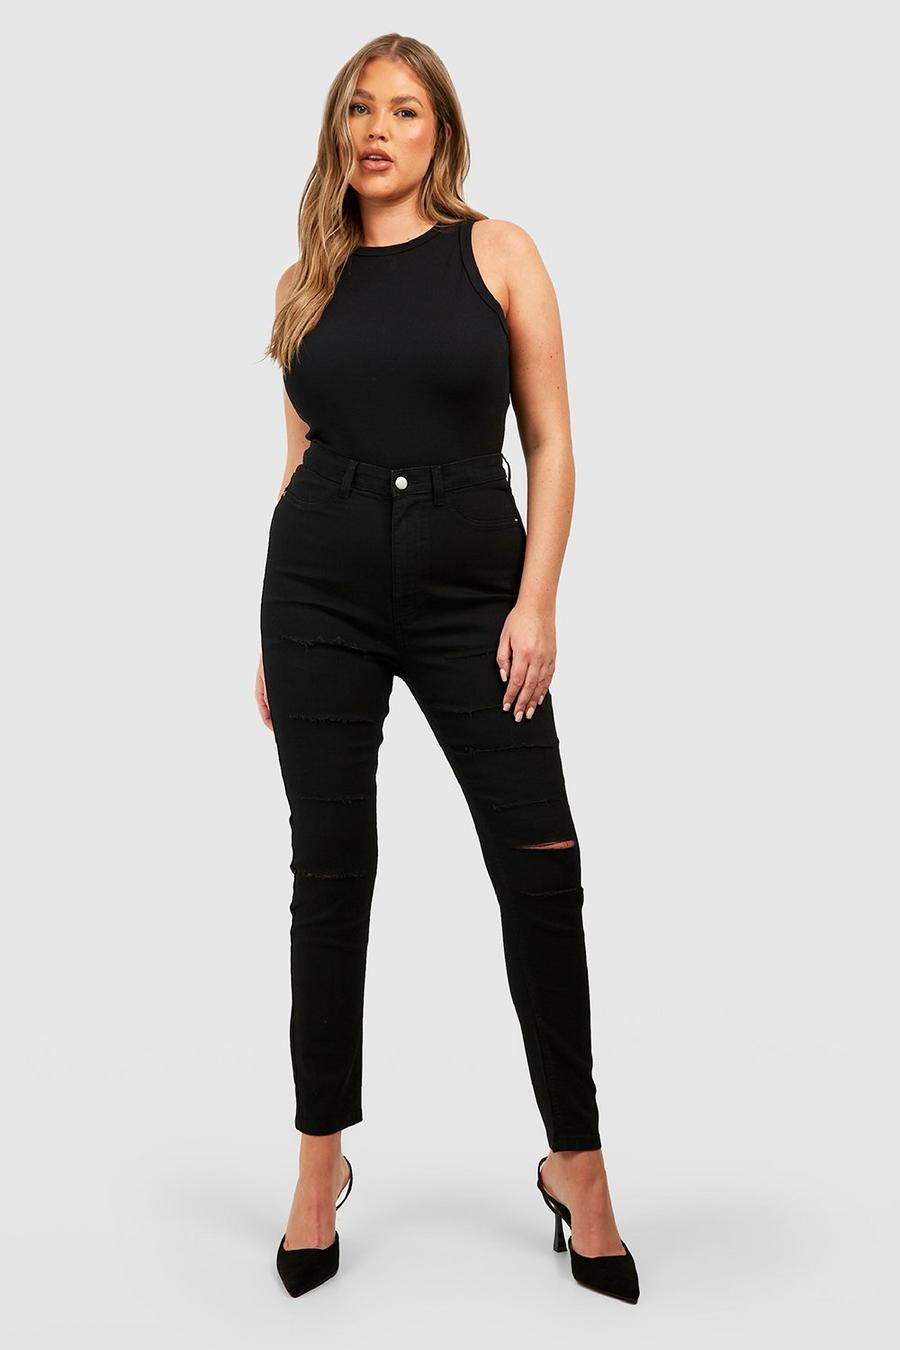 Black Soot Combo Plus Size Jegging - 0X at  Women's Clothing